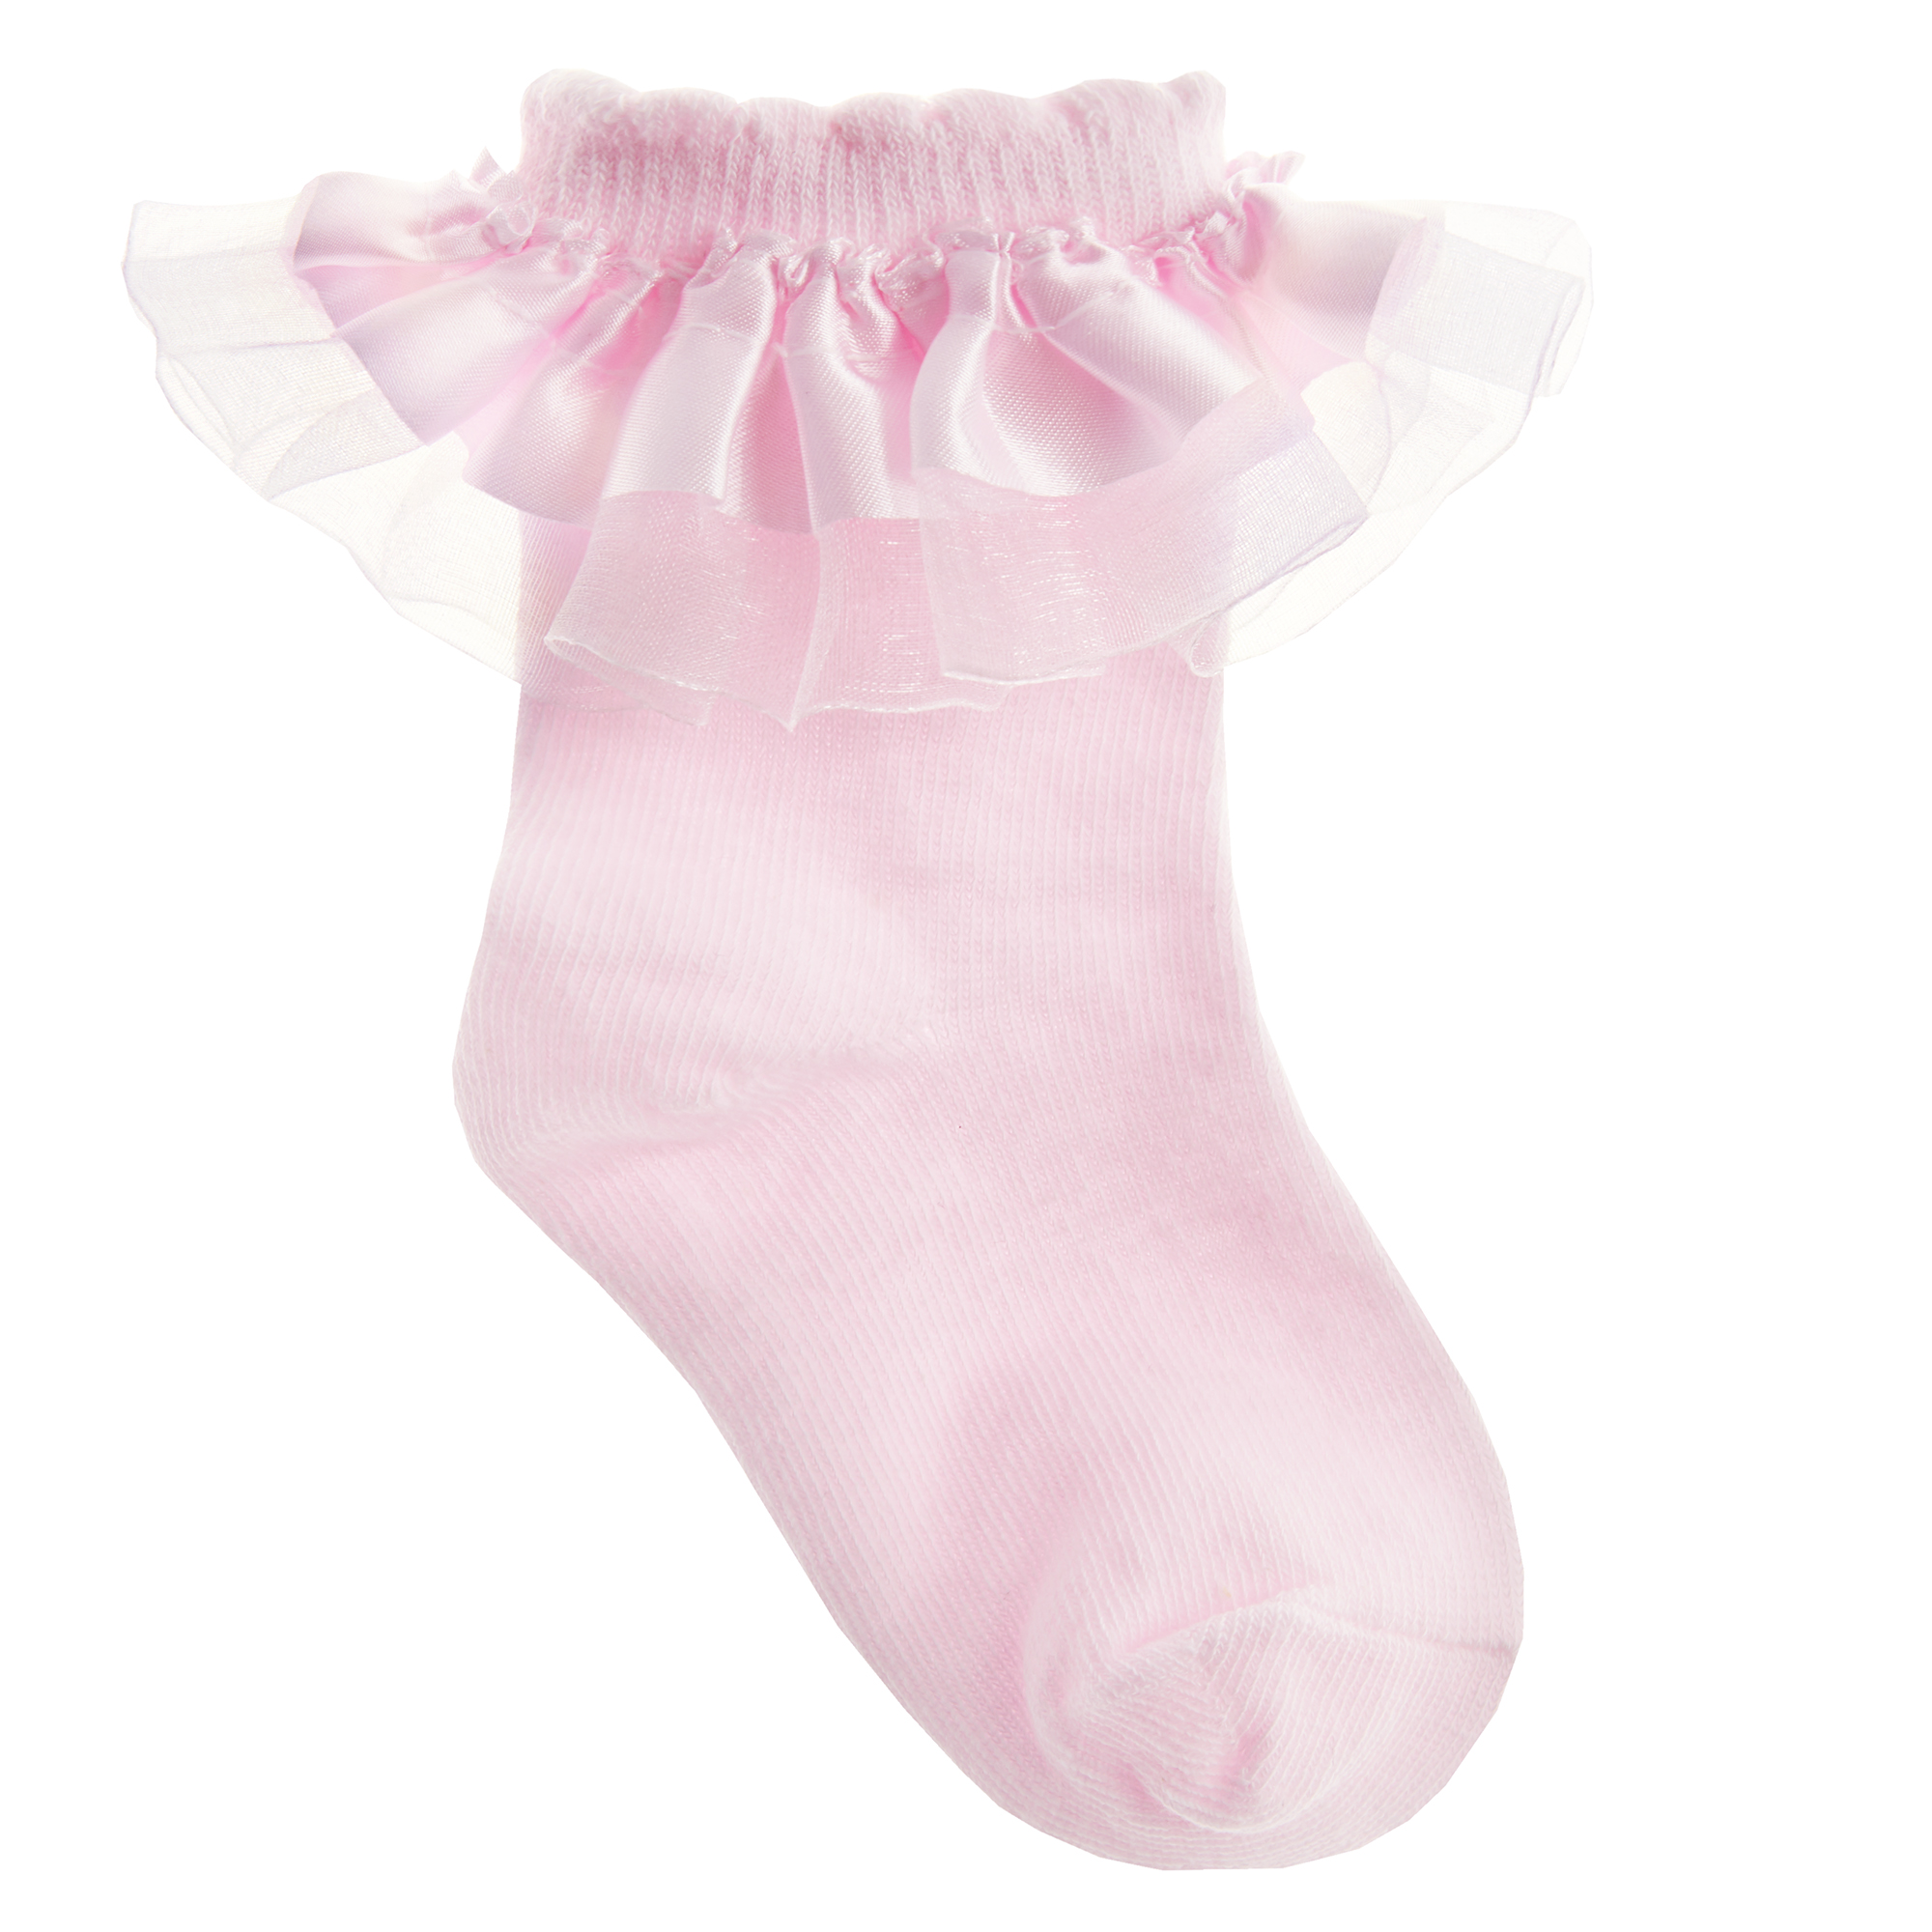 Baby Girls Lace Stocking Tutu Frill Socks Cute Bow Spanish Frilly Cotton Rich 